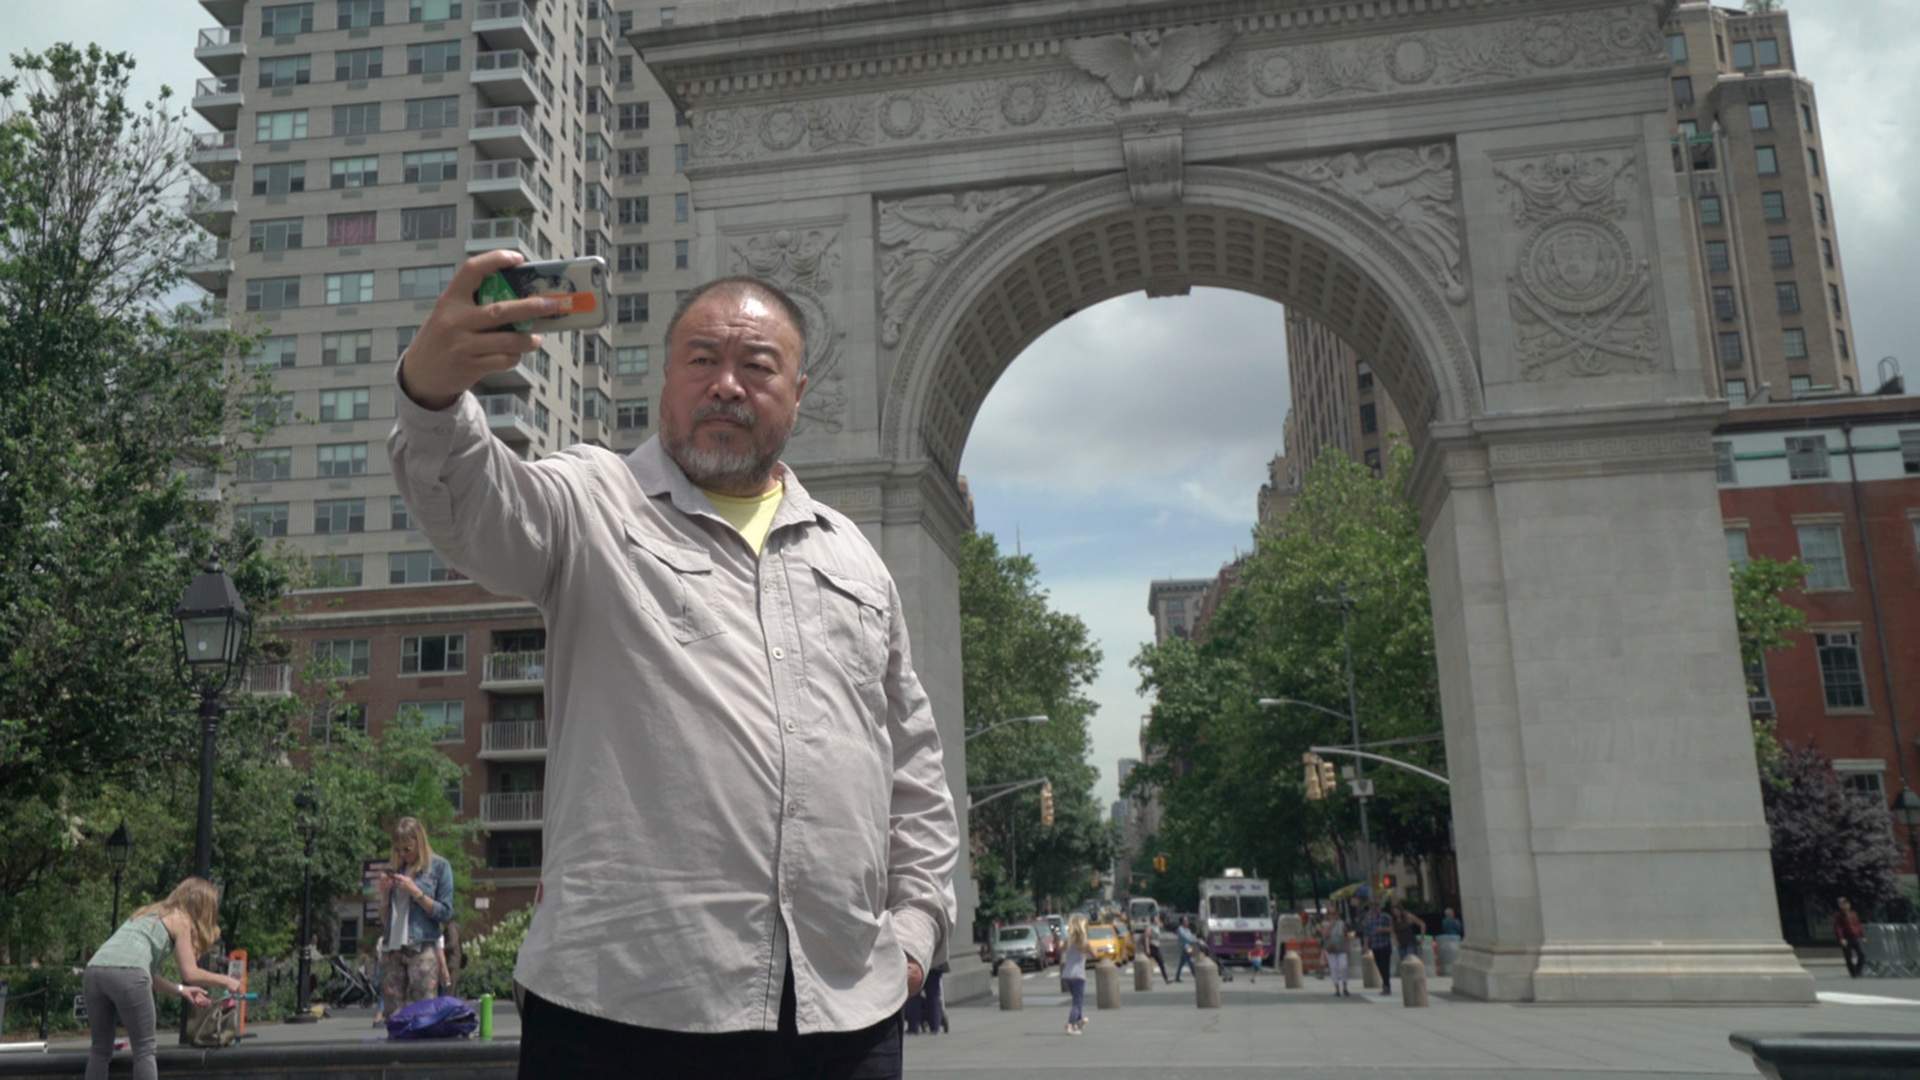 Ai Weiwei Is Crowdfunding His Latest Security and Immigration-Focused New York Installation